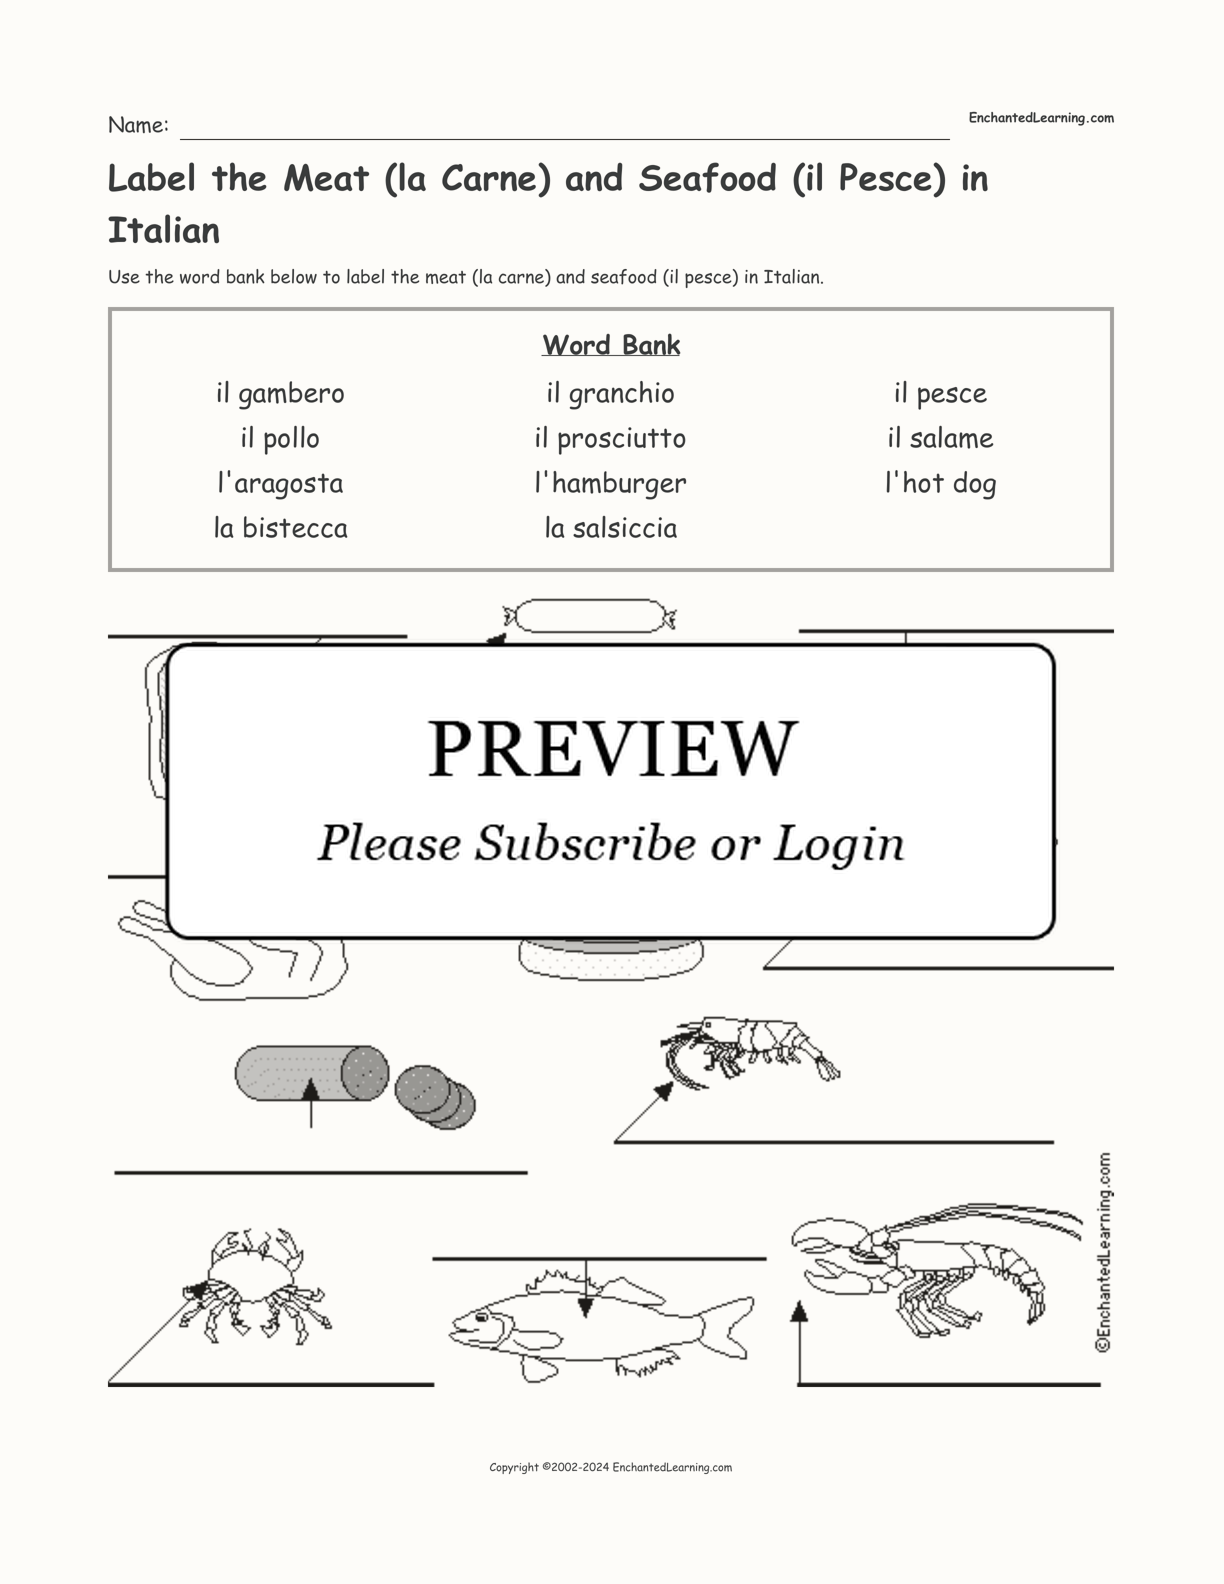 Label the Meat (la Carne) and Seafood (il Pesce) in Italian interactive worksheet page 1